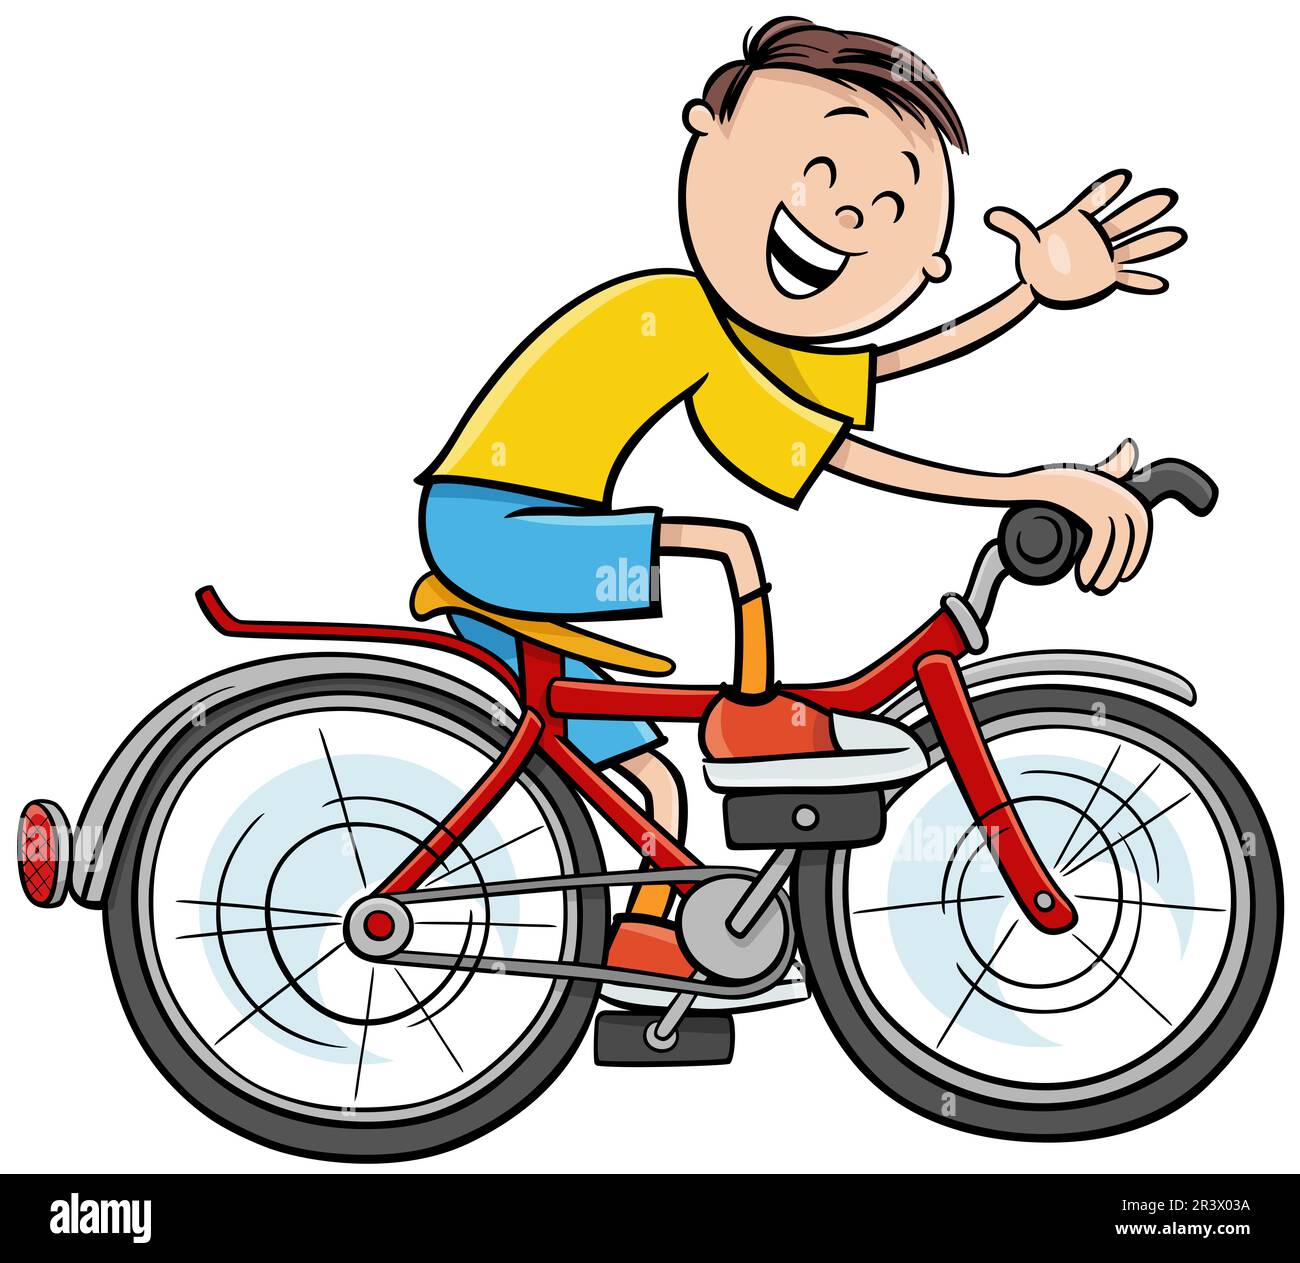 Happy cartoon boy character riding a bicycle Stock Photo - Alamy